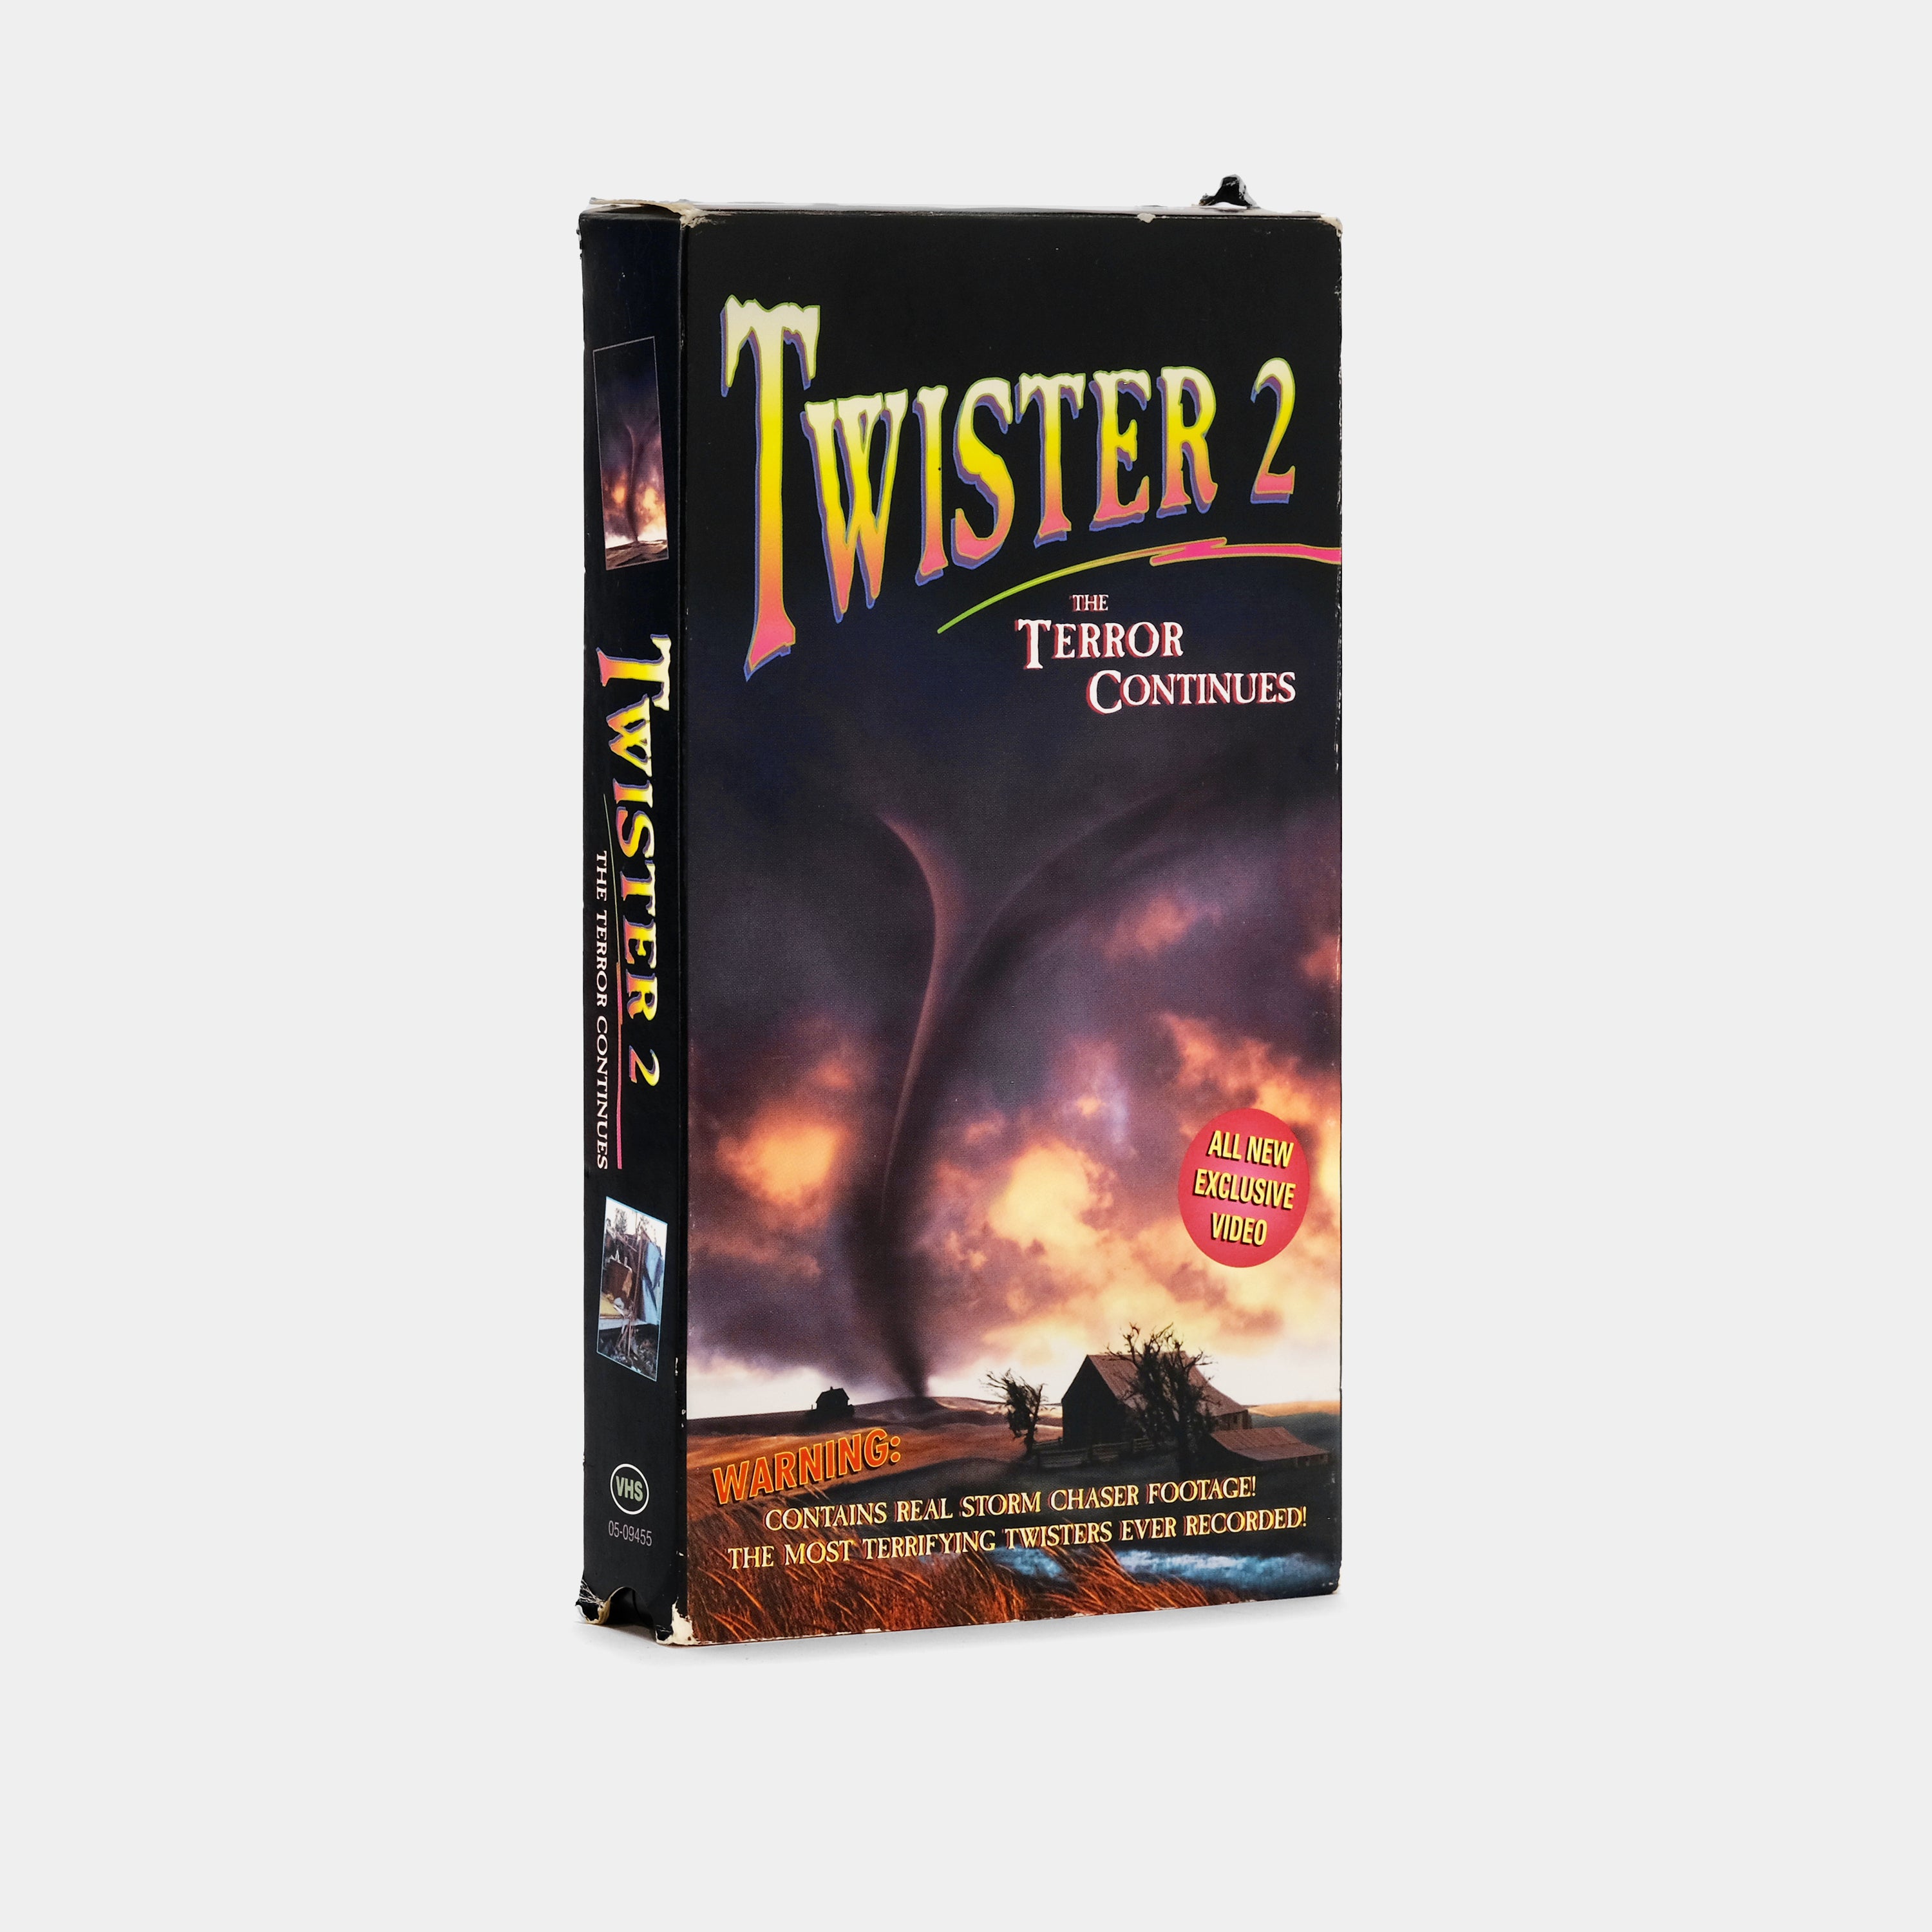 Twister 2: The Terror Continues VHS Tape